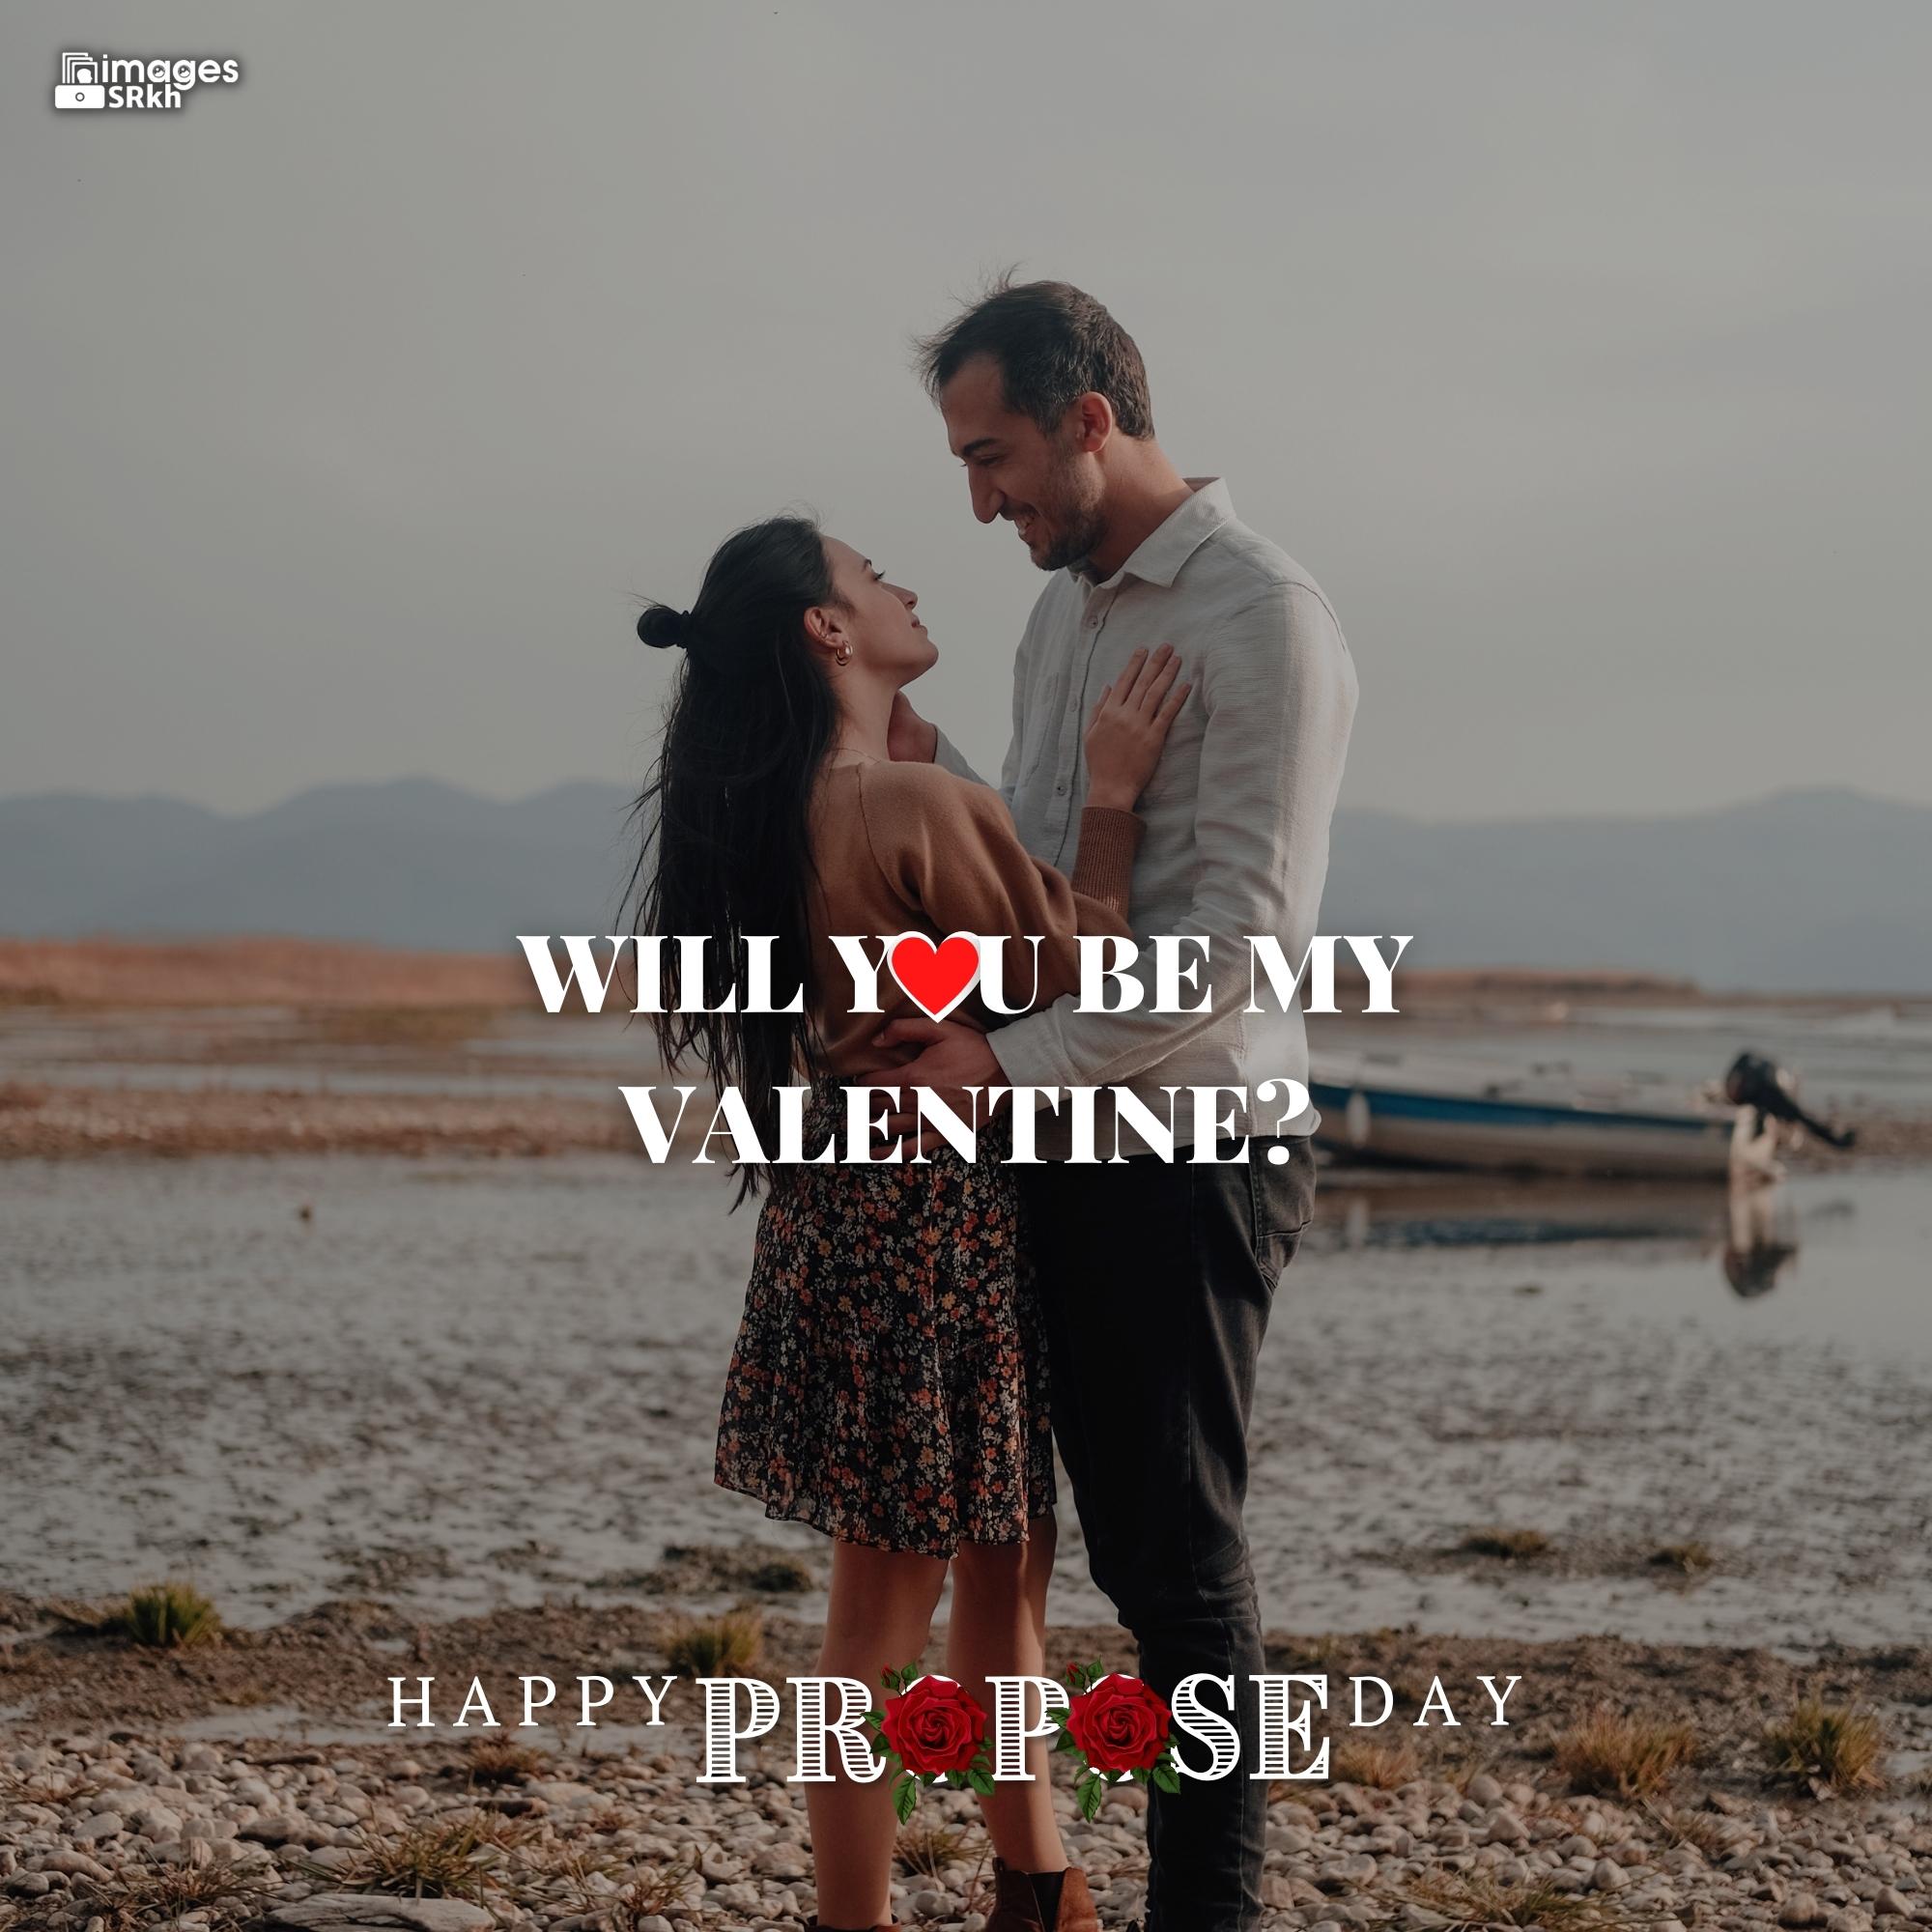 Propose Day Images | 232 | Will You Be My Valentine